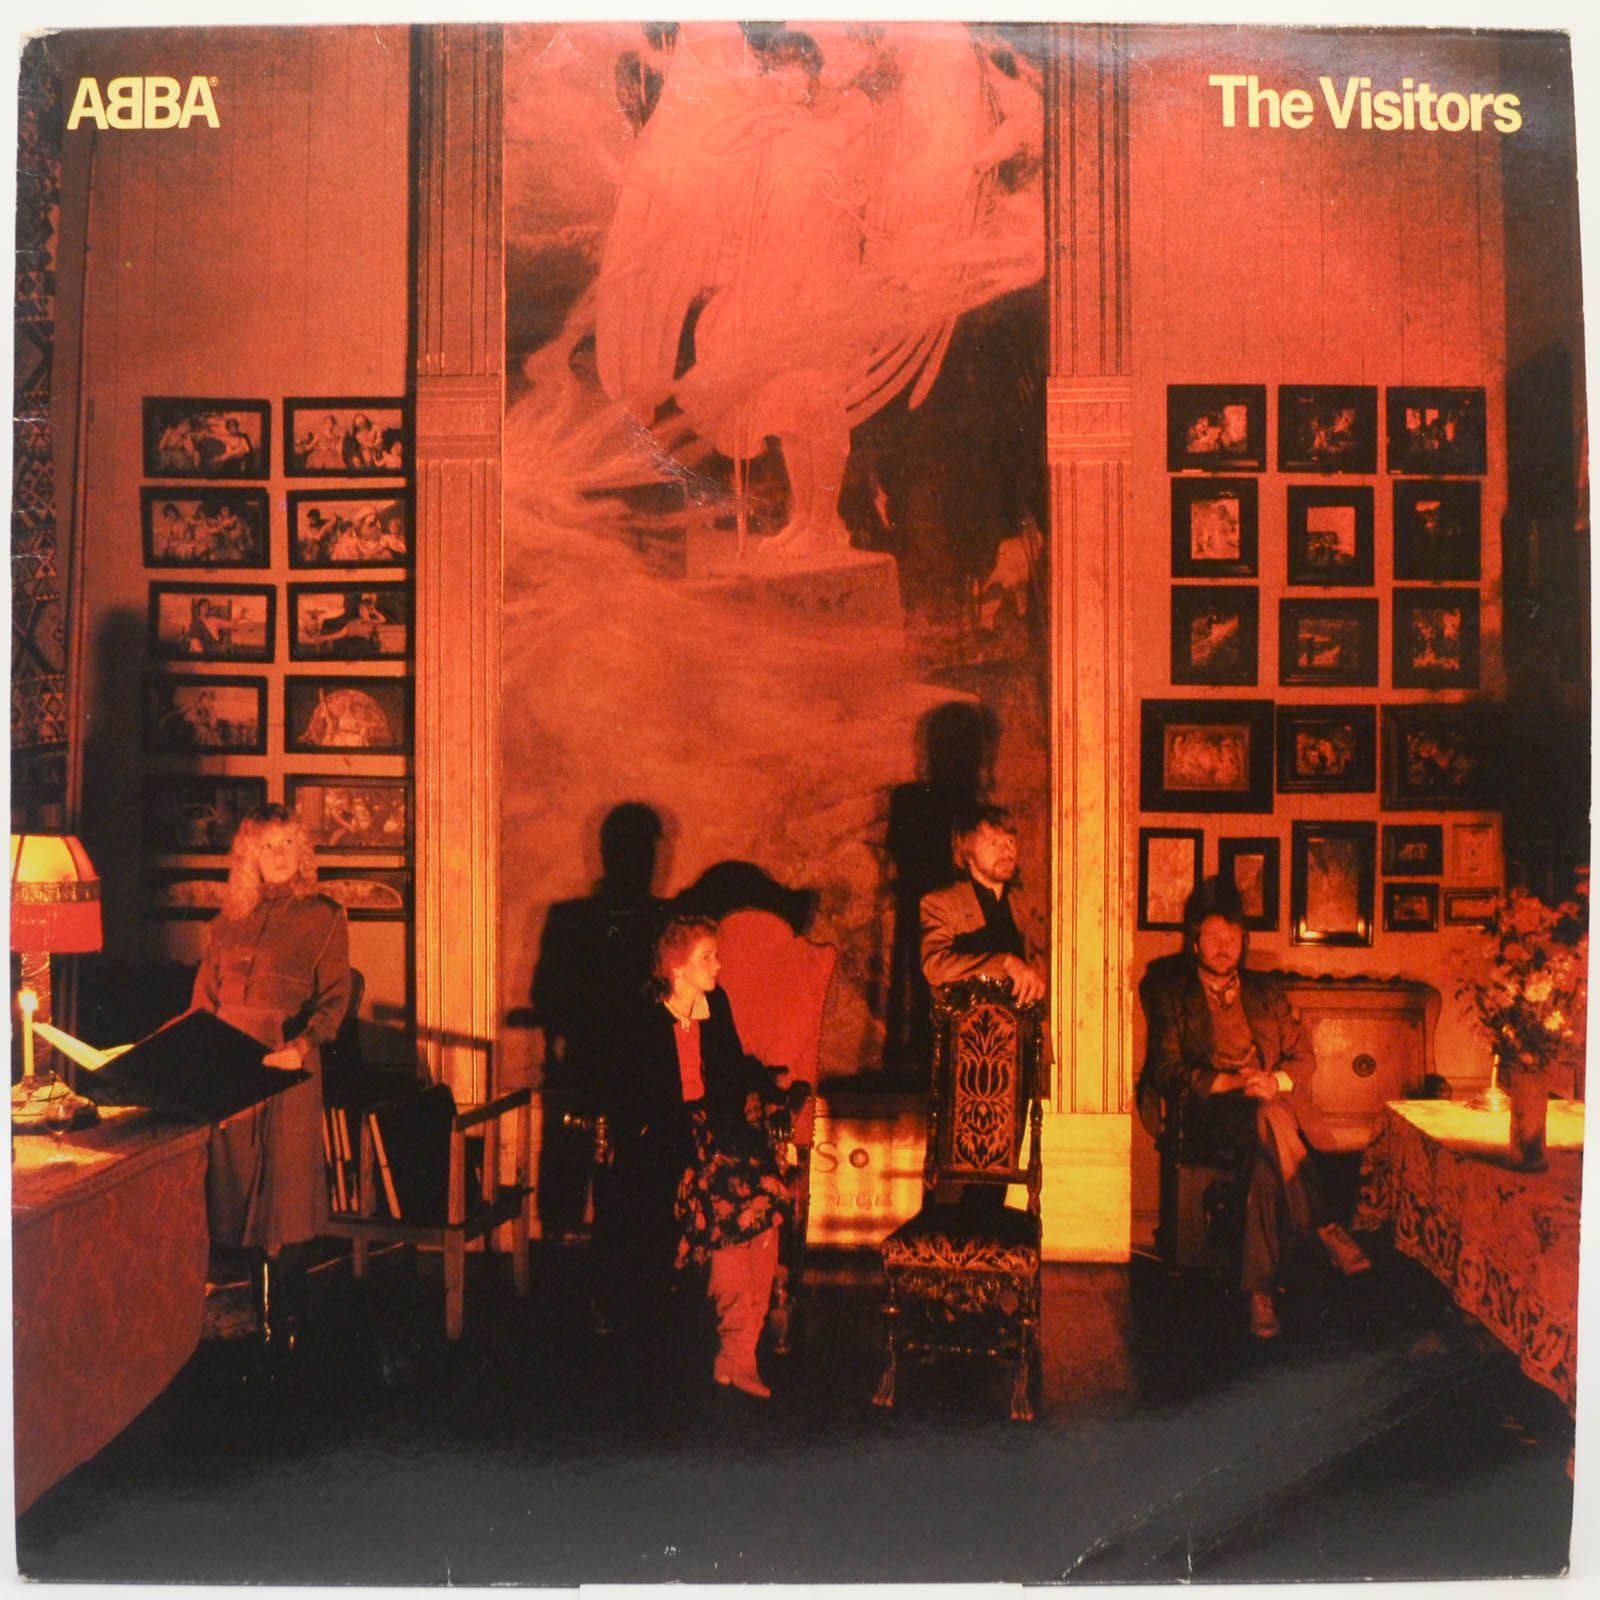 ABBA — The Visitors (UK), 1981